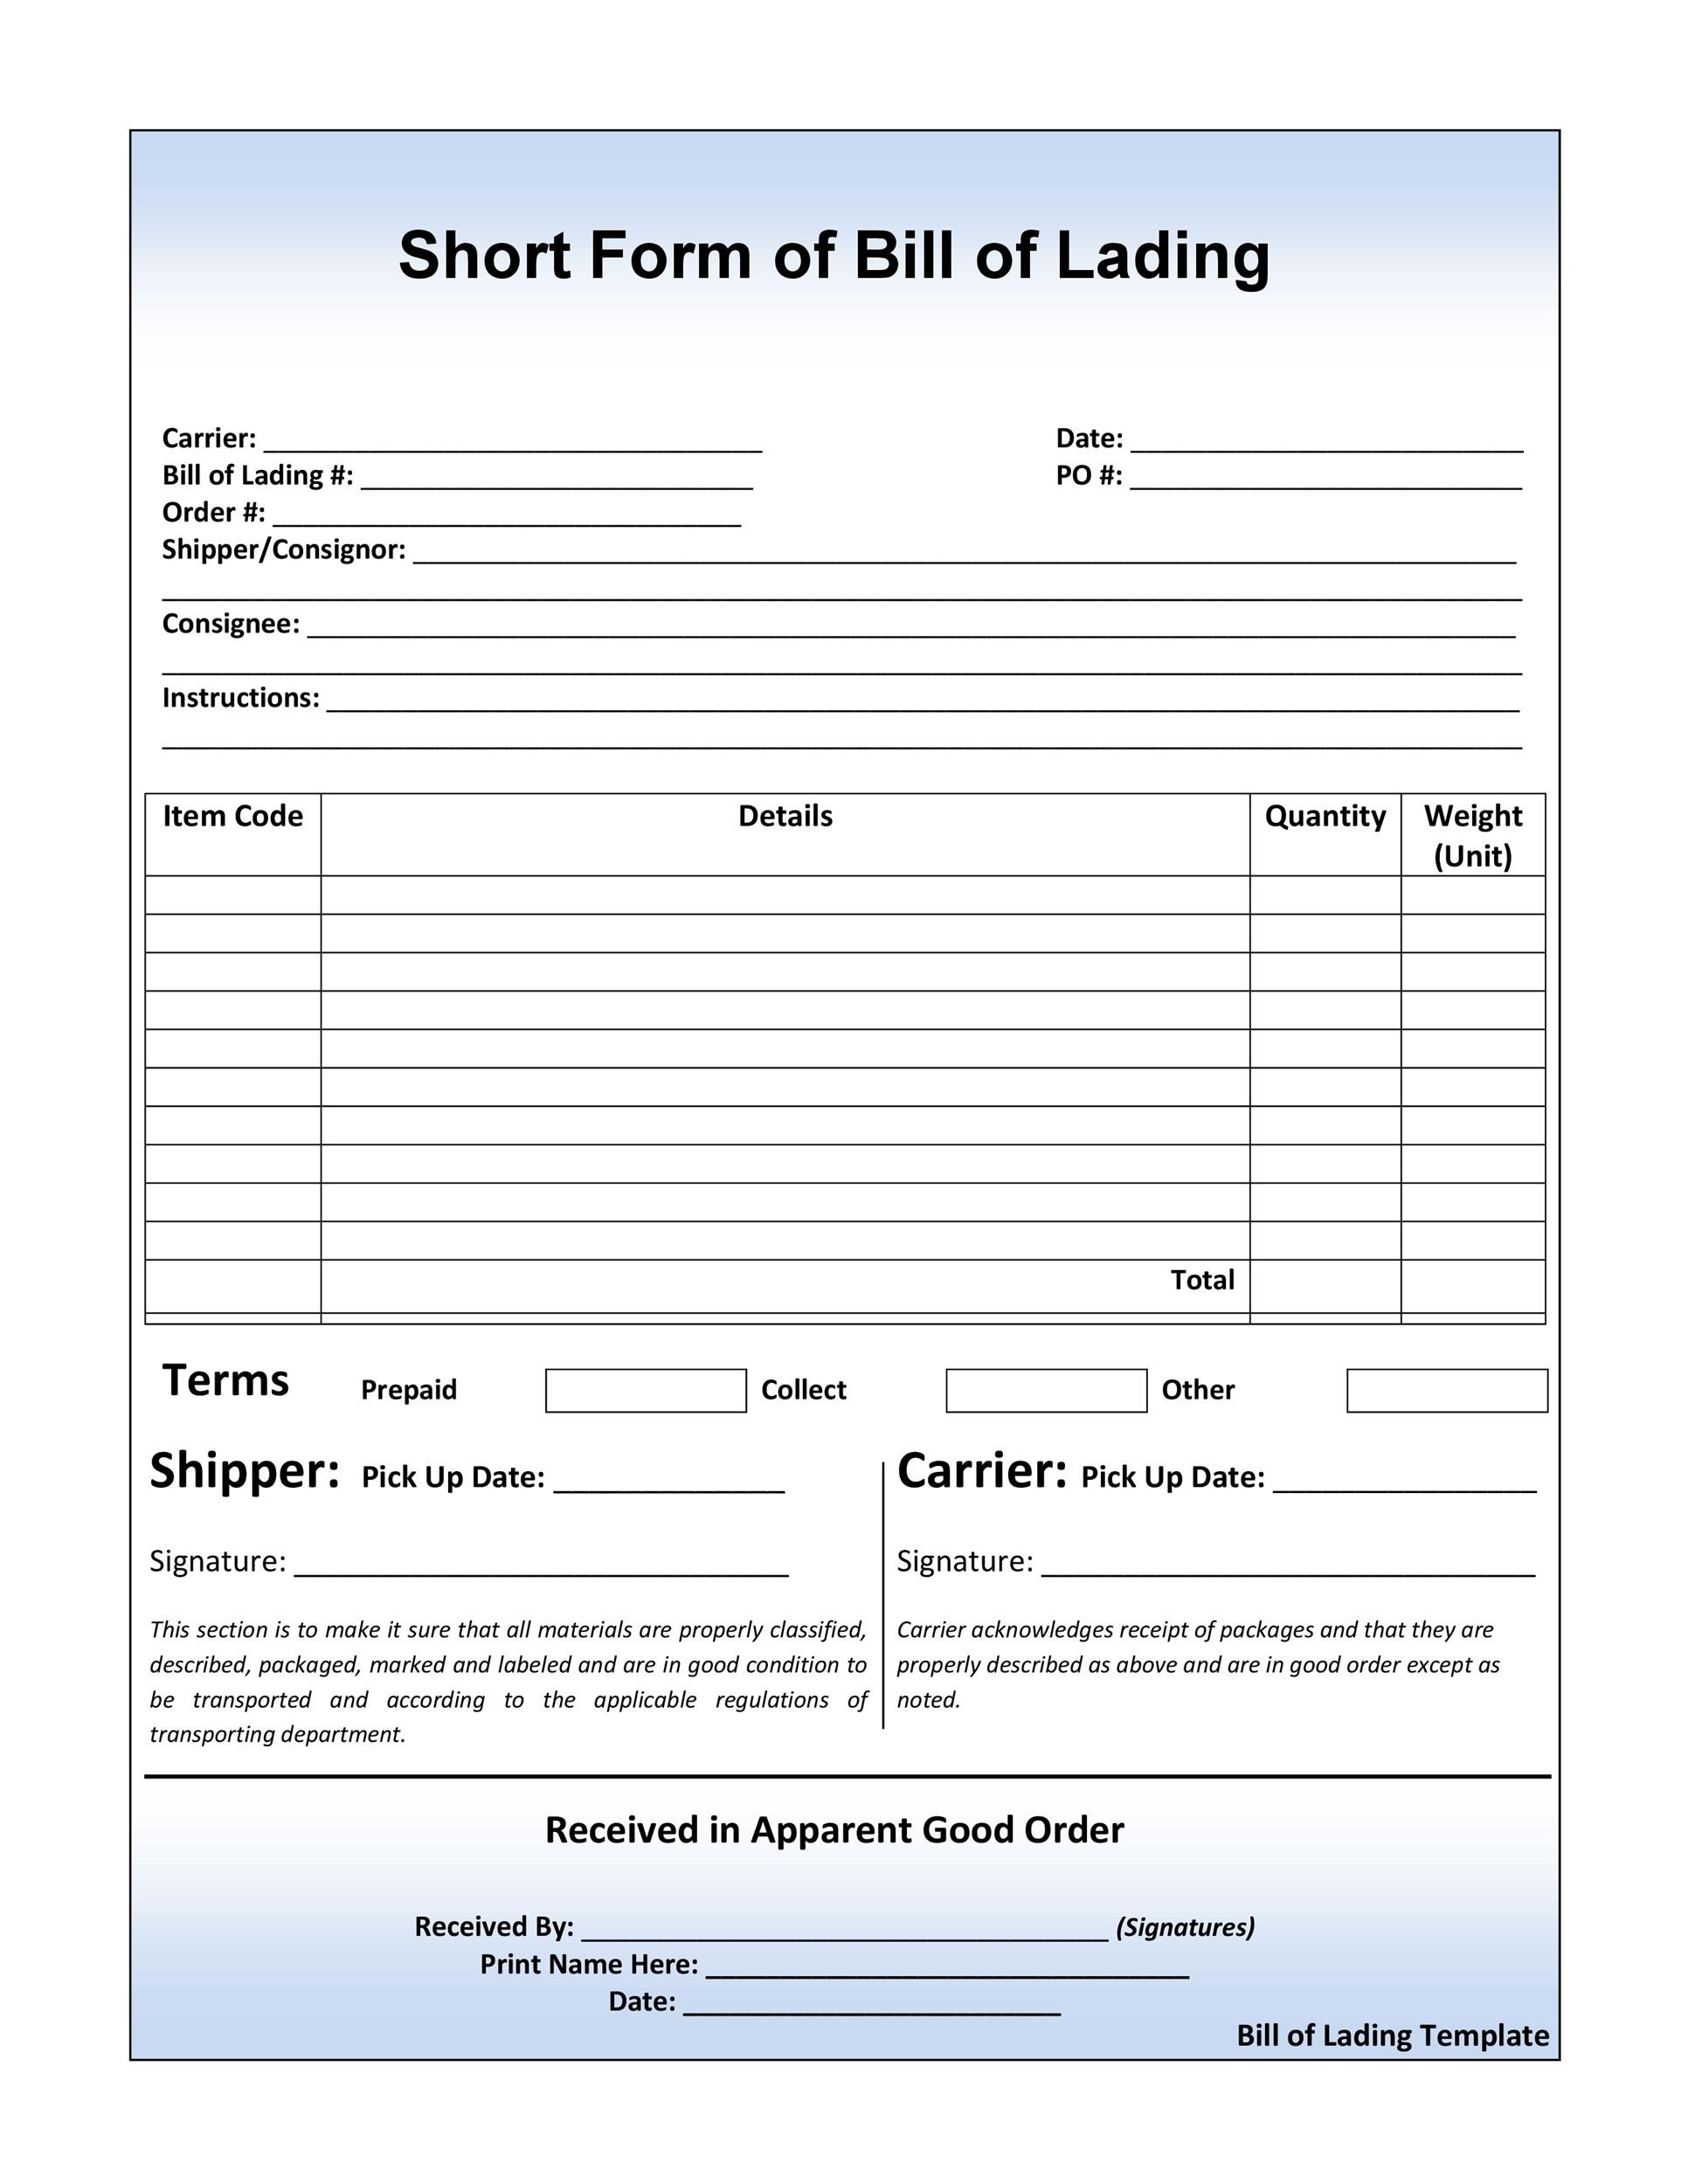 printable-template-bill-of-lading-form